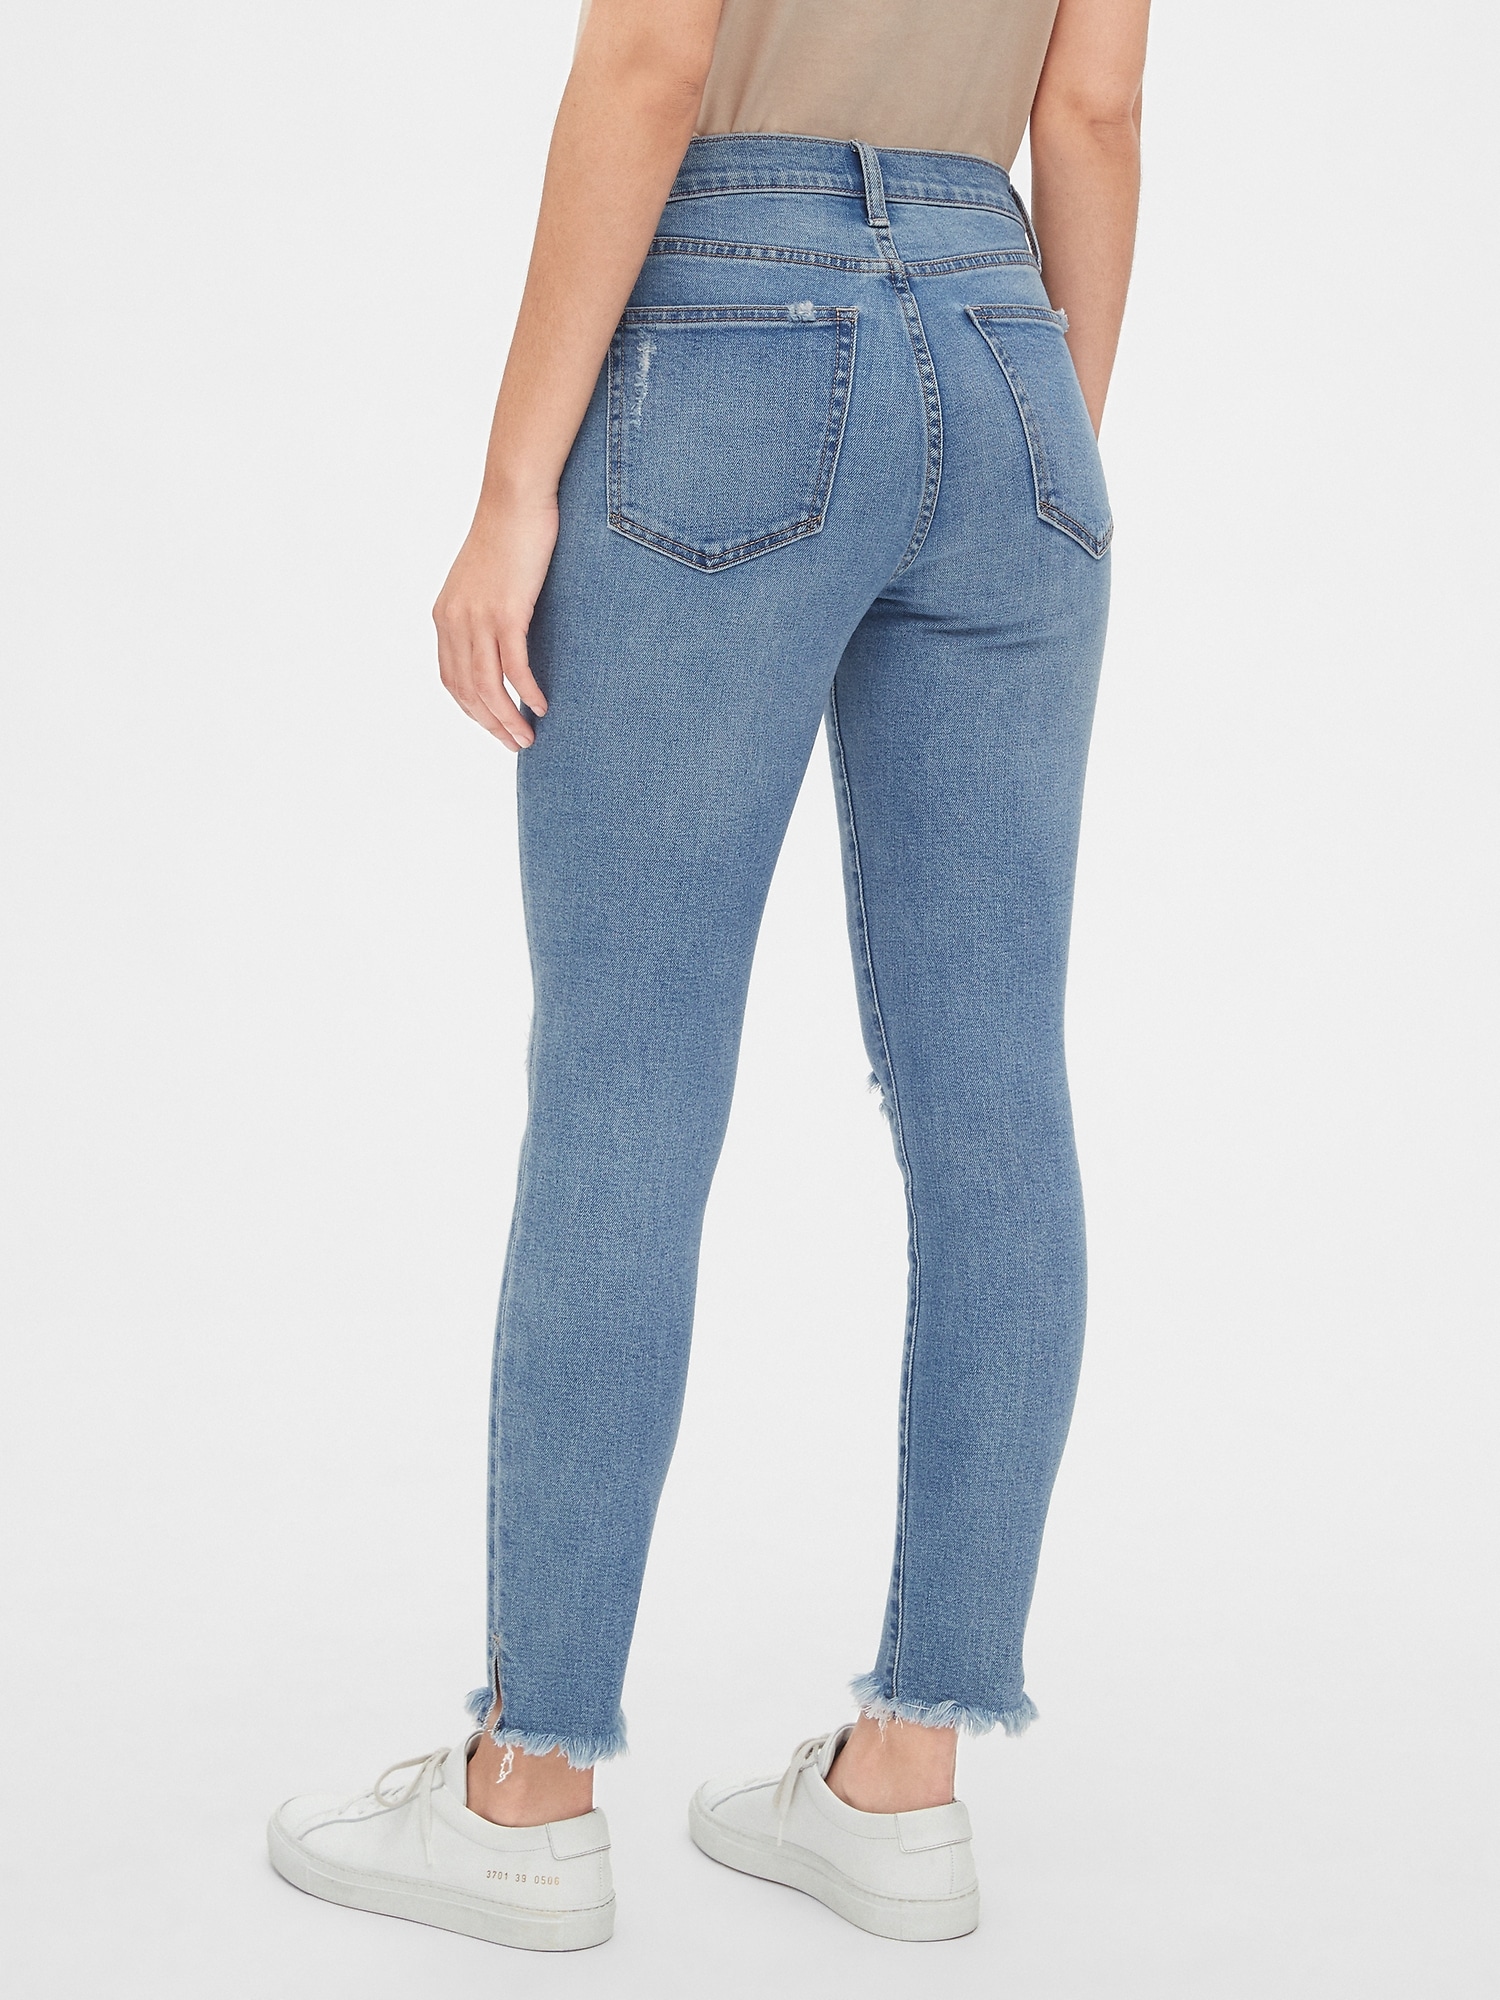 gap ankle jeans